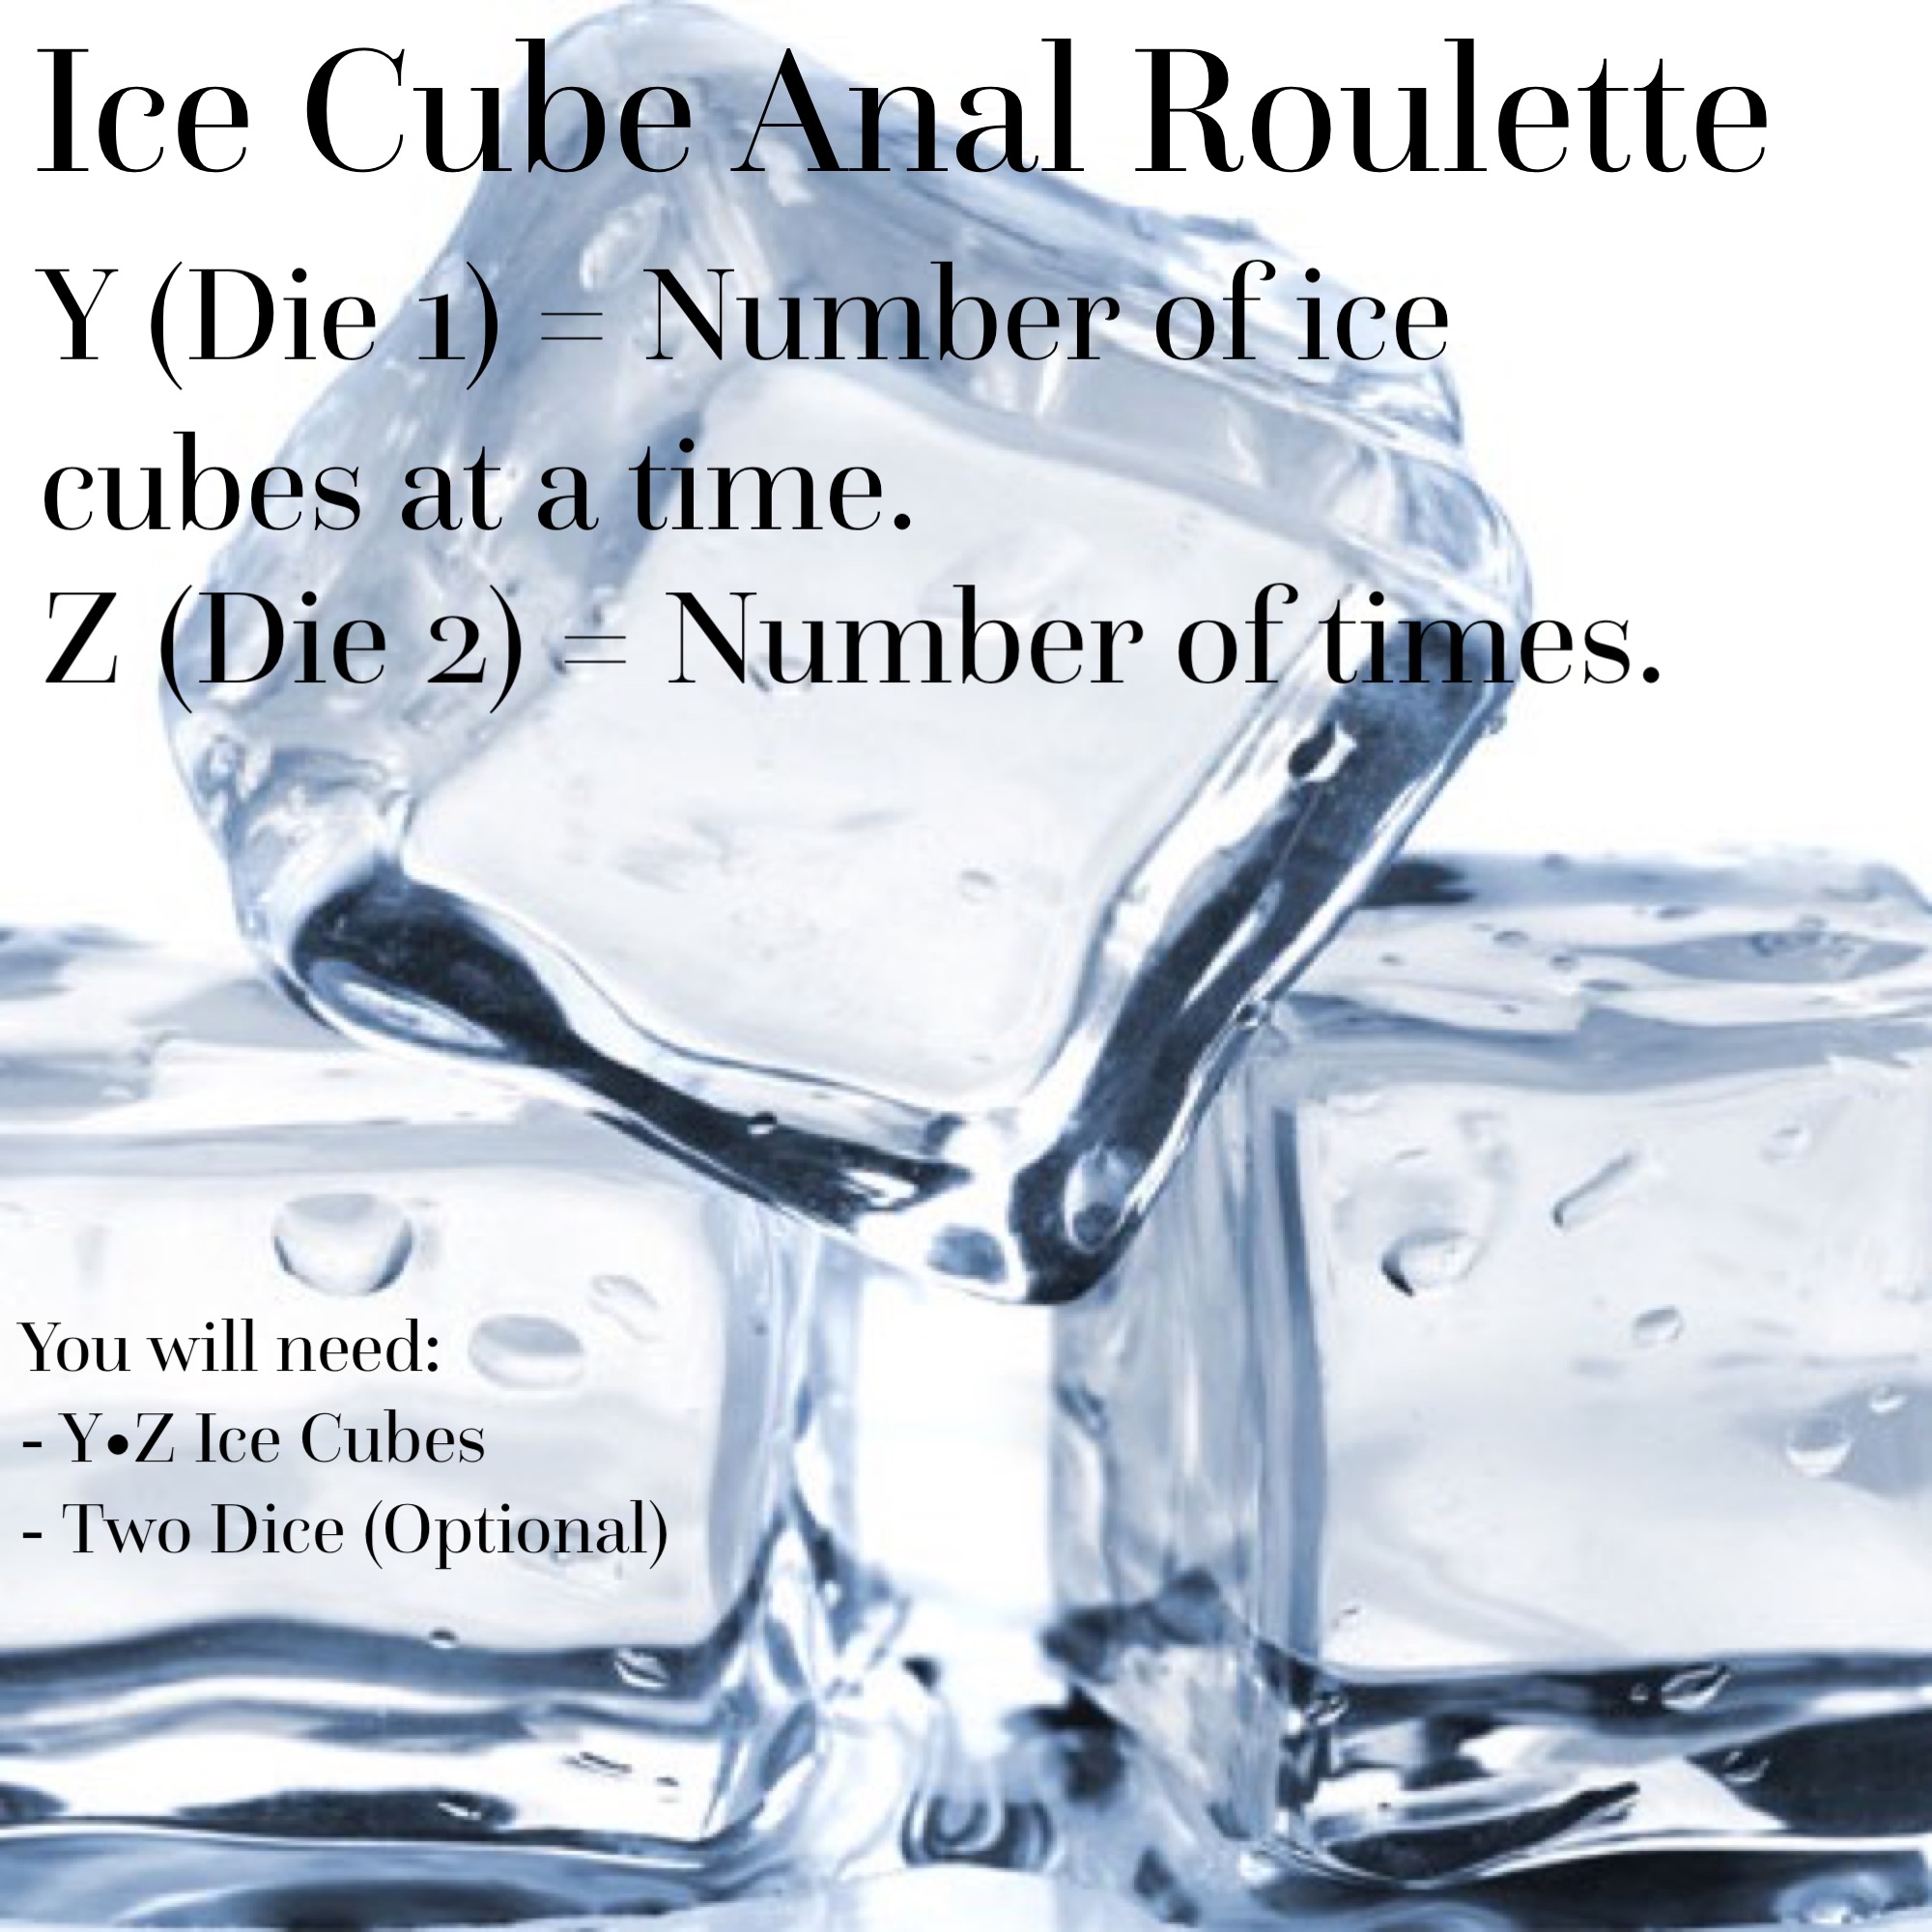 Snappie recommend best of ice cube anal